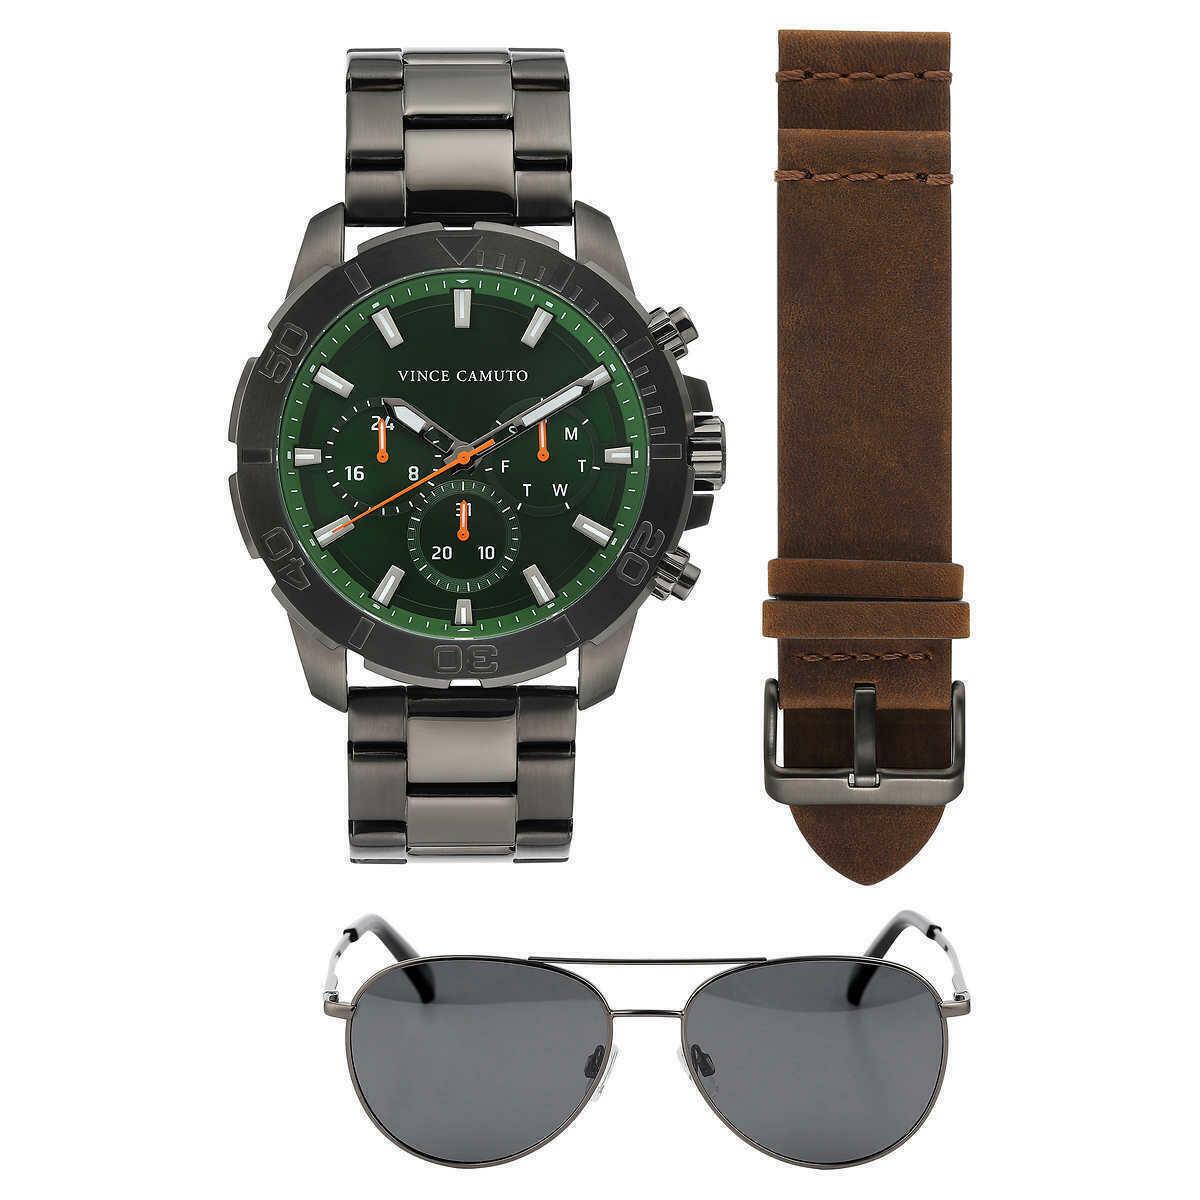 Vince Camuto Men s Chronograph Watch Gift Set with Sunglasses - VC1147GNDGST